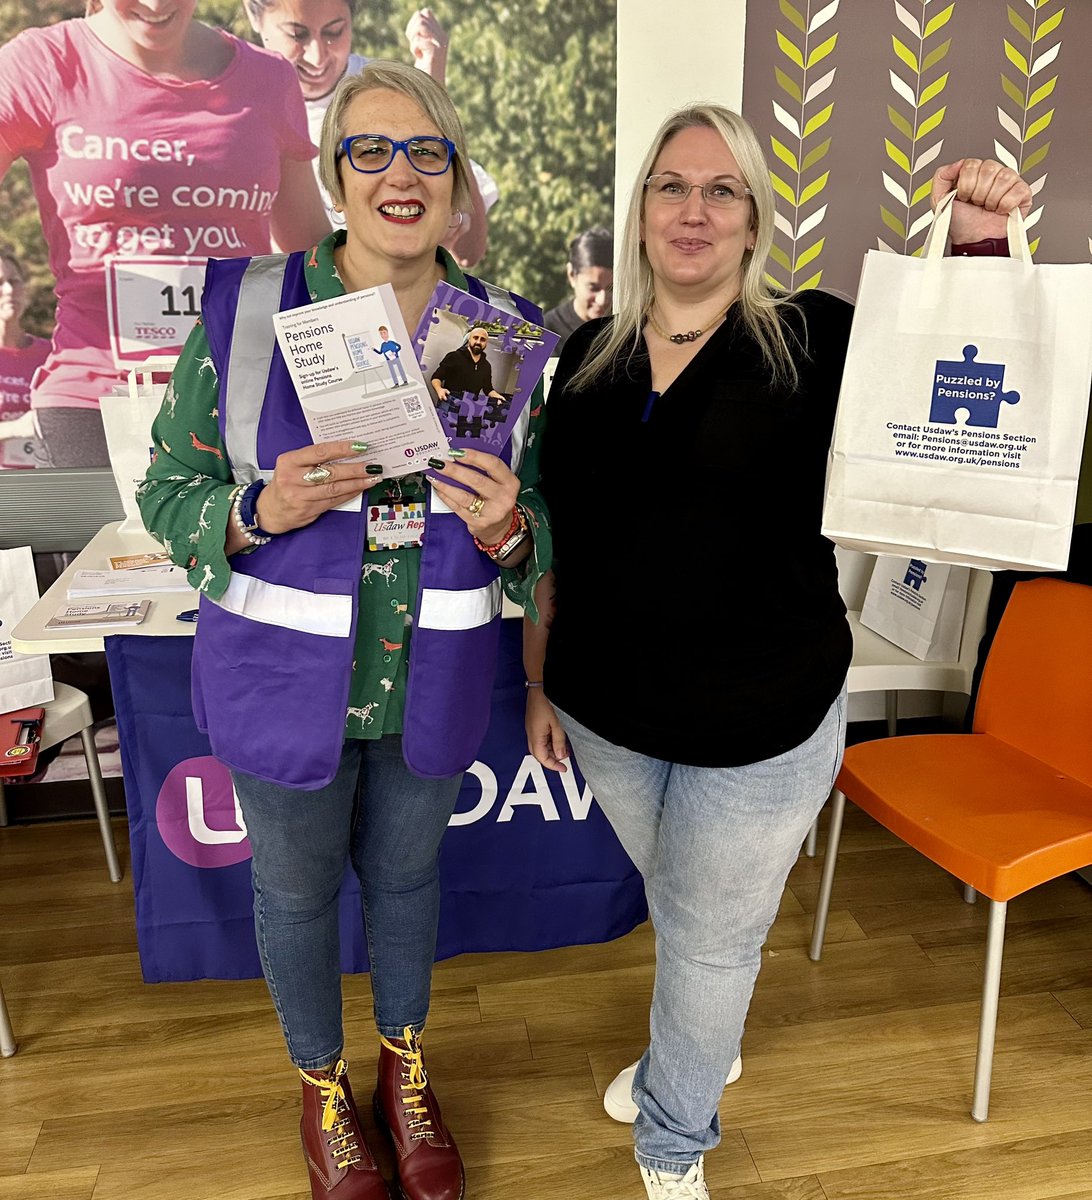 @UsdawUnion @ladyracer7 @Lainy1977  Pension Awareness Day in-store.  Informing our members how to get free advice from Usdaw’s Pensions Dept (these guys really know their stuff)  #joinaunion #usdaw